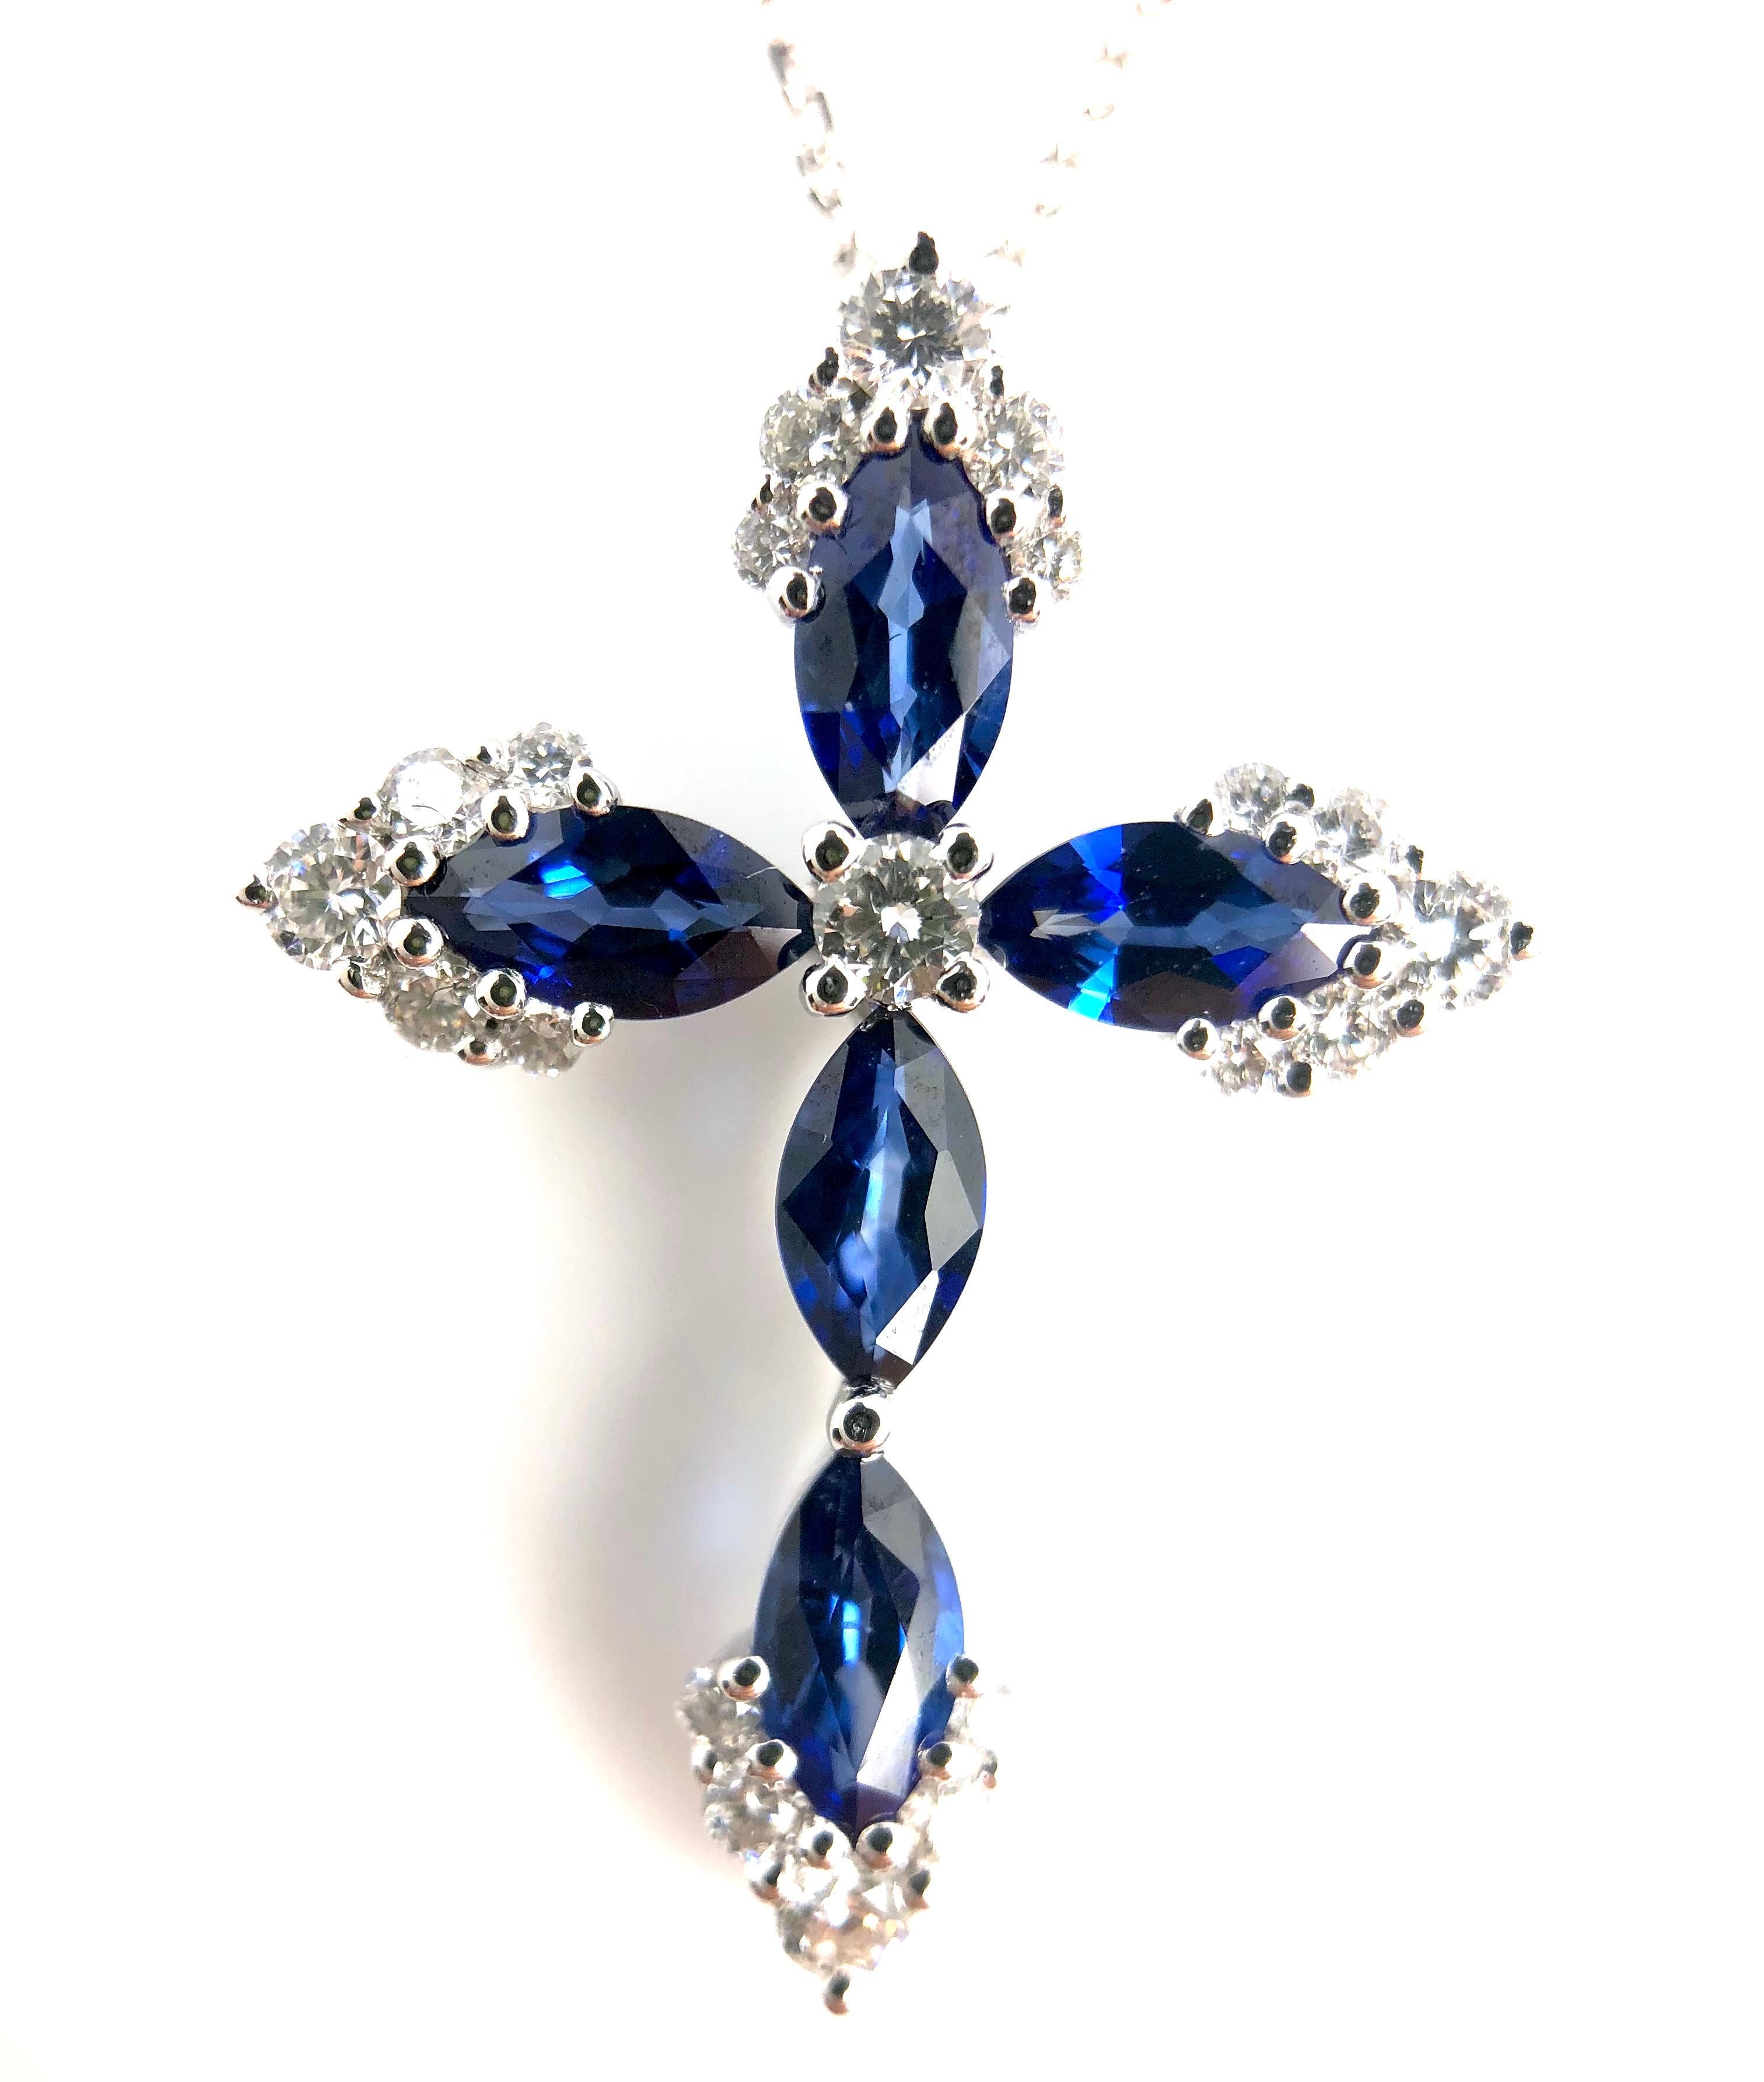 This lovely halo cross pendant features 5 marquise cut sapphires, total 0.79 carats, surrounded by 0.23 carats round diamonds.

Center: 0.79 carats blue sapphire
Diamond Halo: 21 round diamonds total 0.23 carats
Set in 18k White Gold.

Many of our